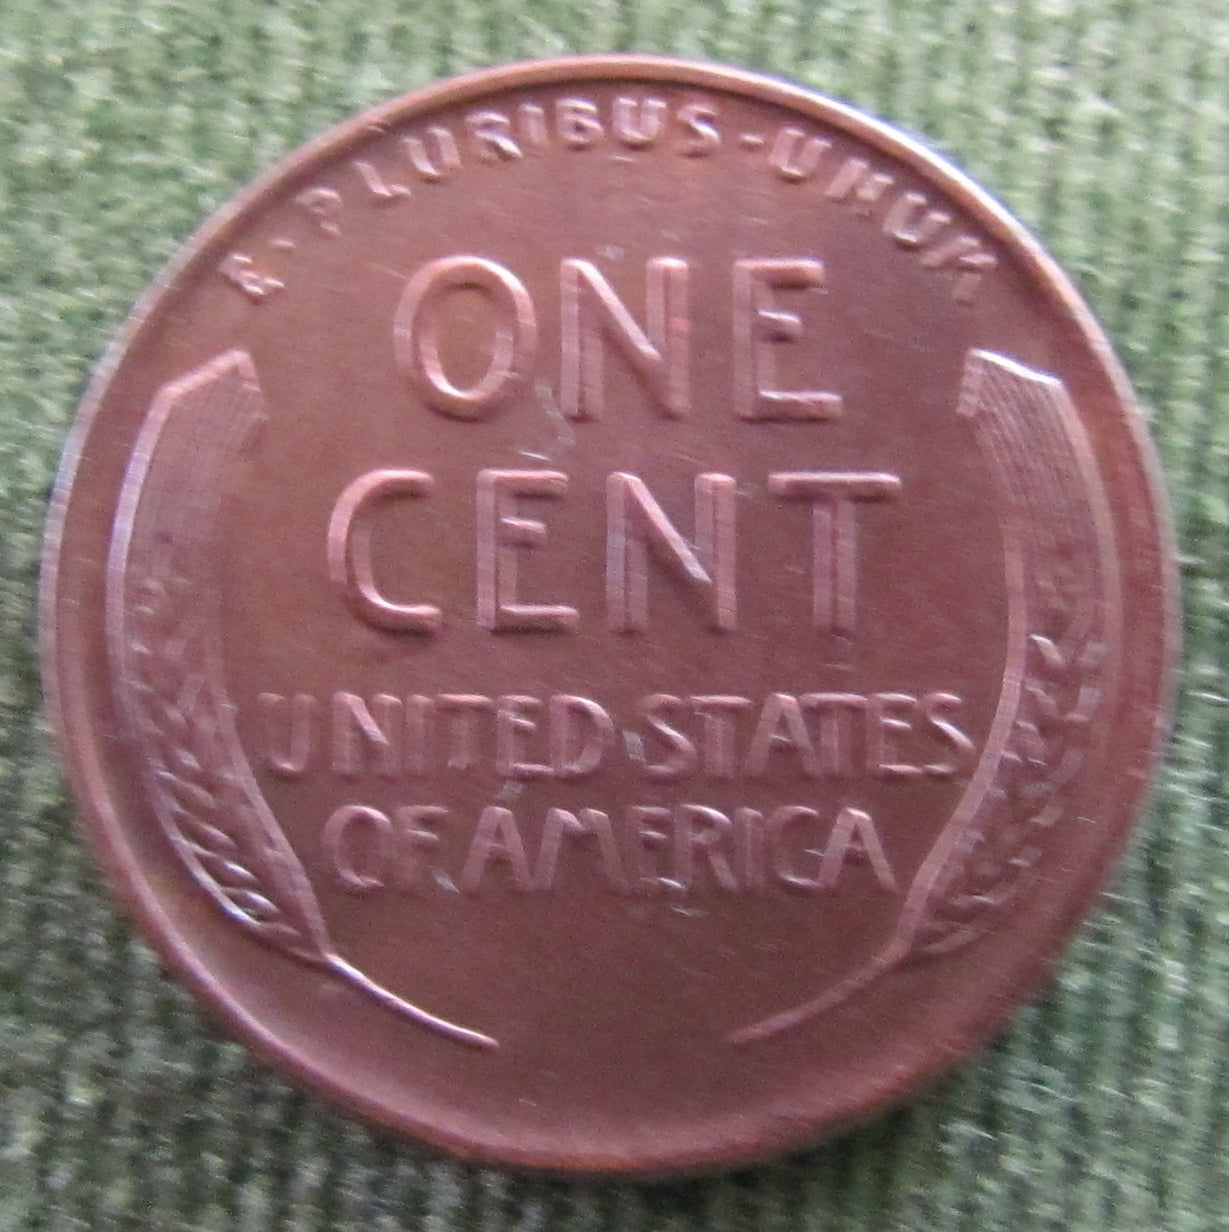 USA American 1939 1 Cent Wheat Lincoln Coin - Almost Uncirculated